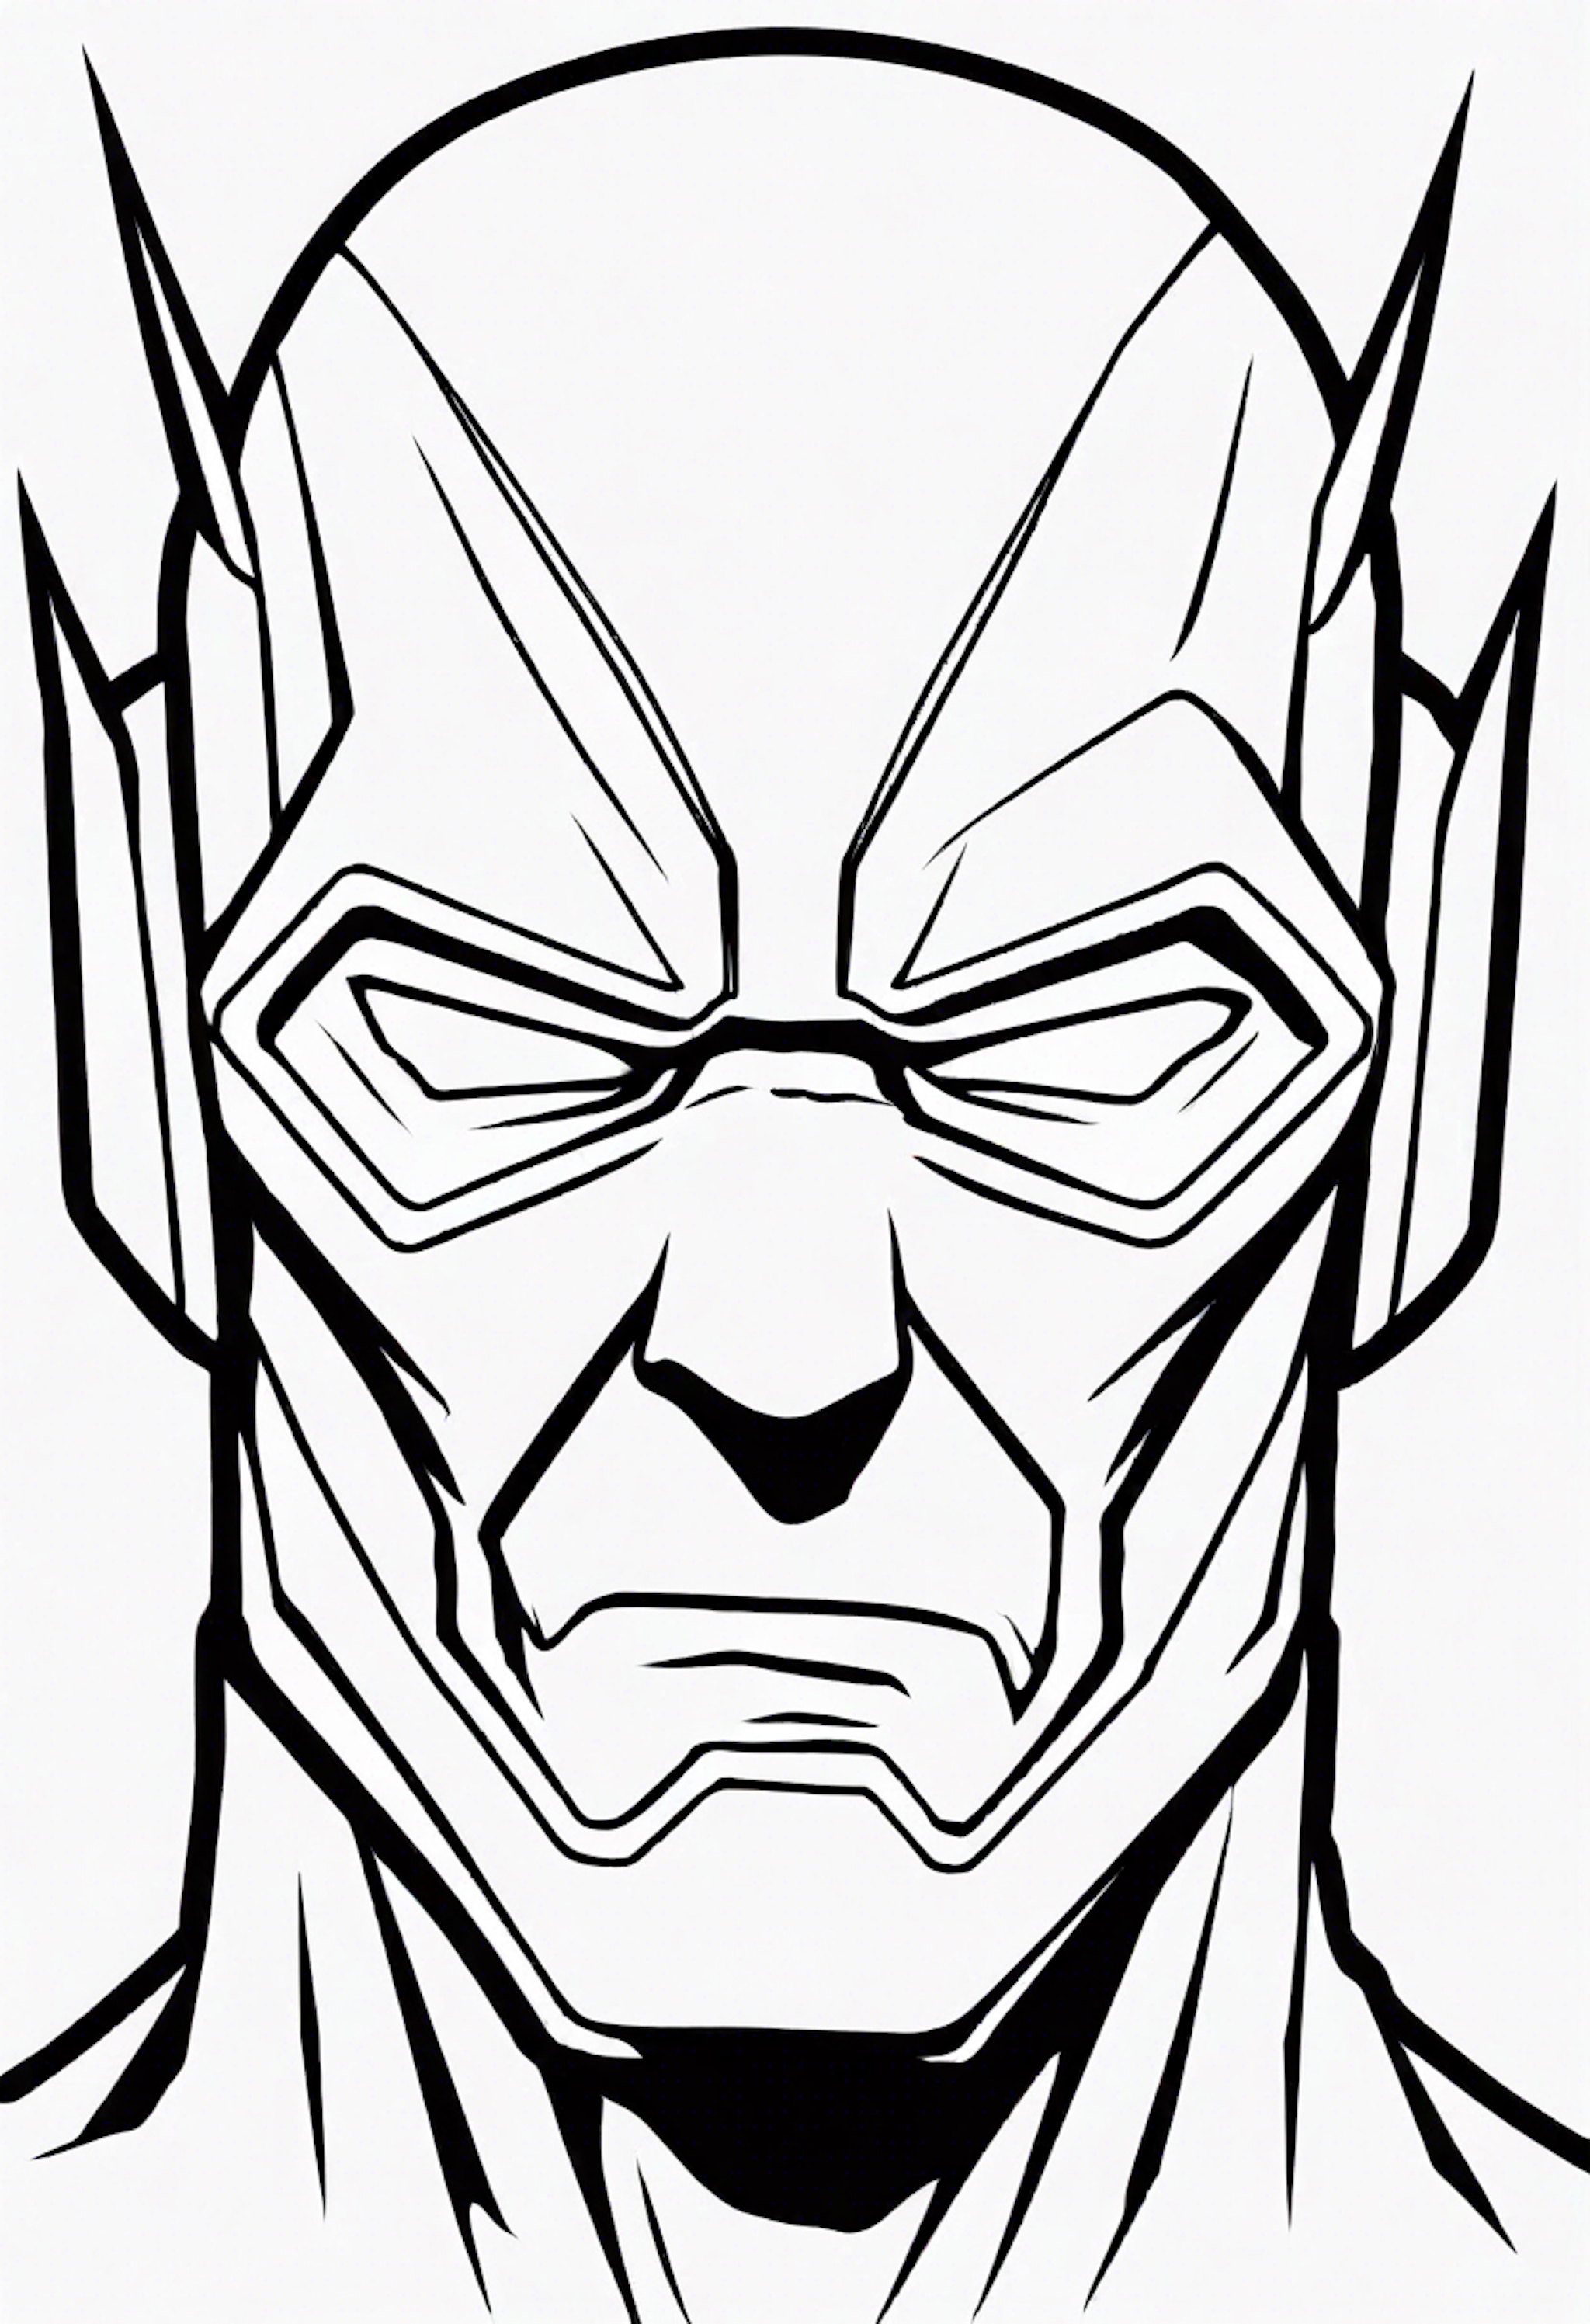 A coloring page for 1 Flash coloring pages